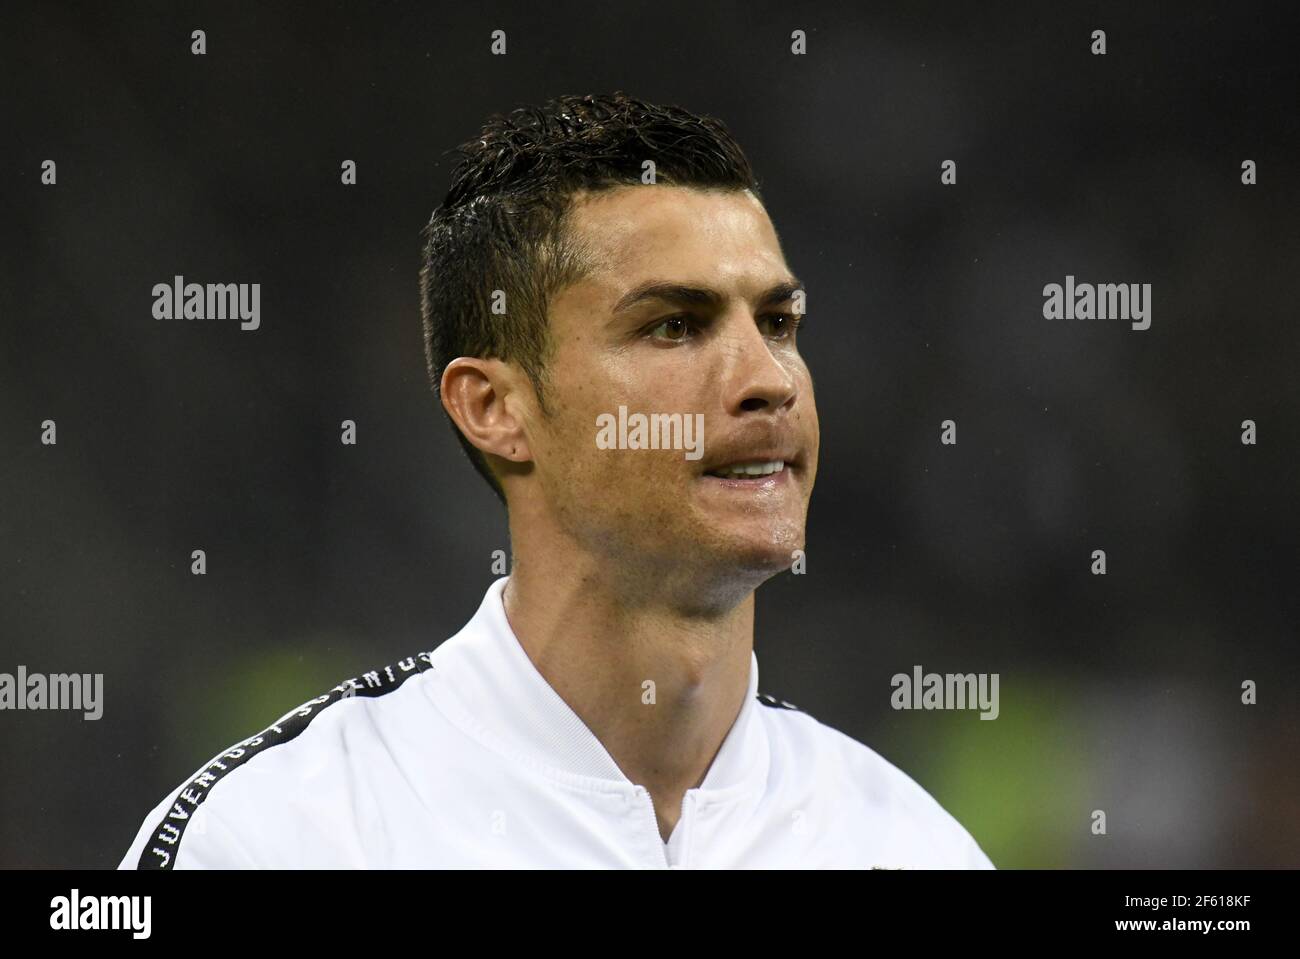 FC Juventus's portoguese soccer player Cristiano Ronaldo portraited  before the Serie A match AC Milan vs FC Juventus. Stock Photo